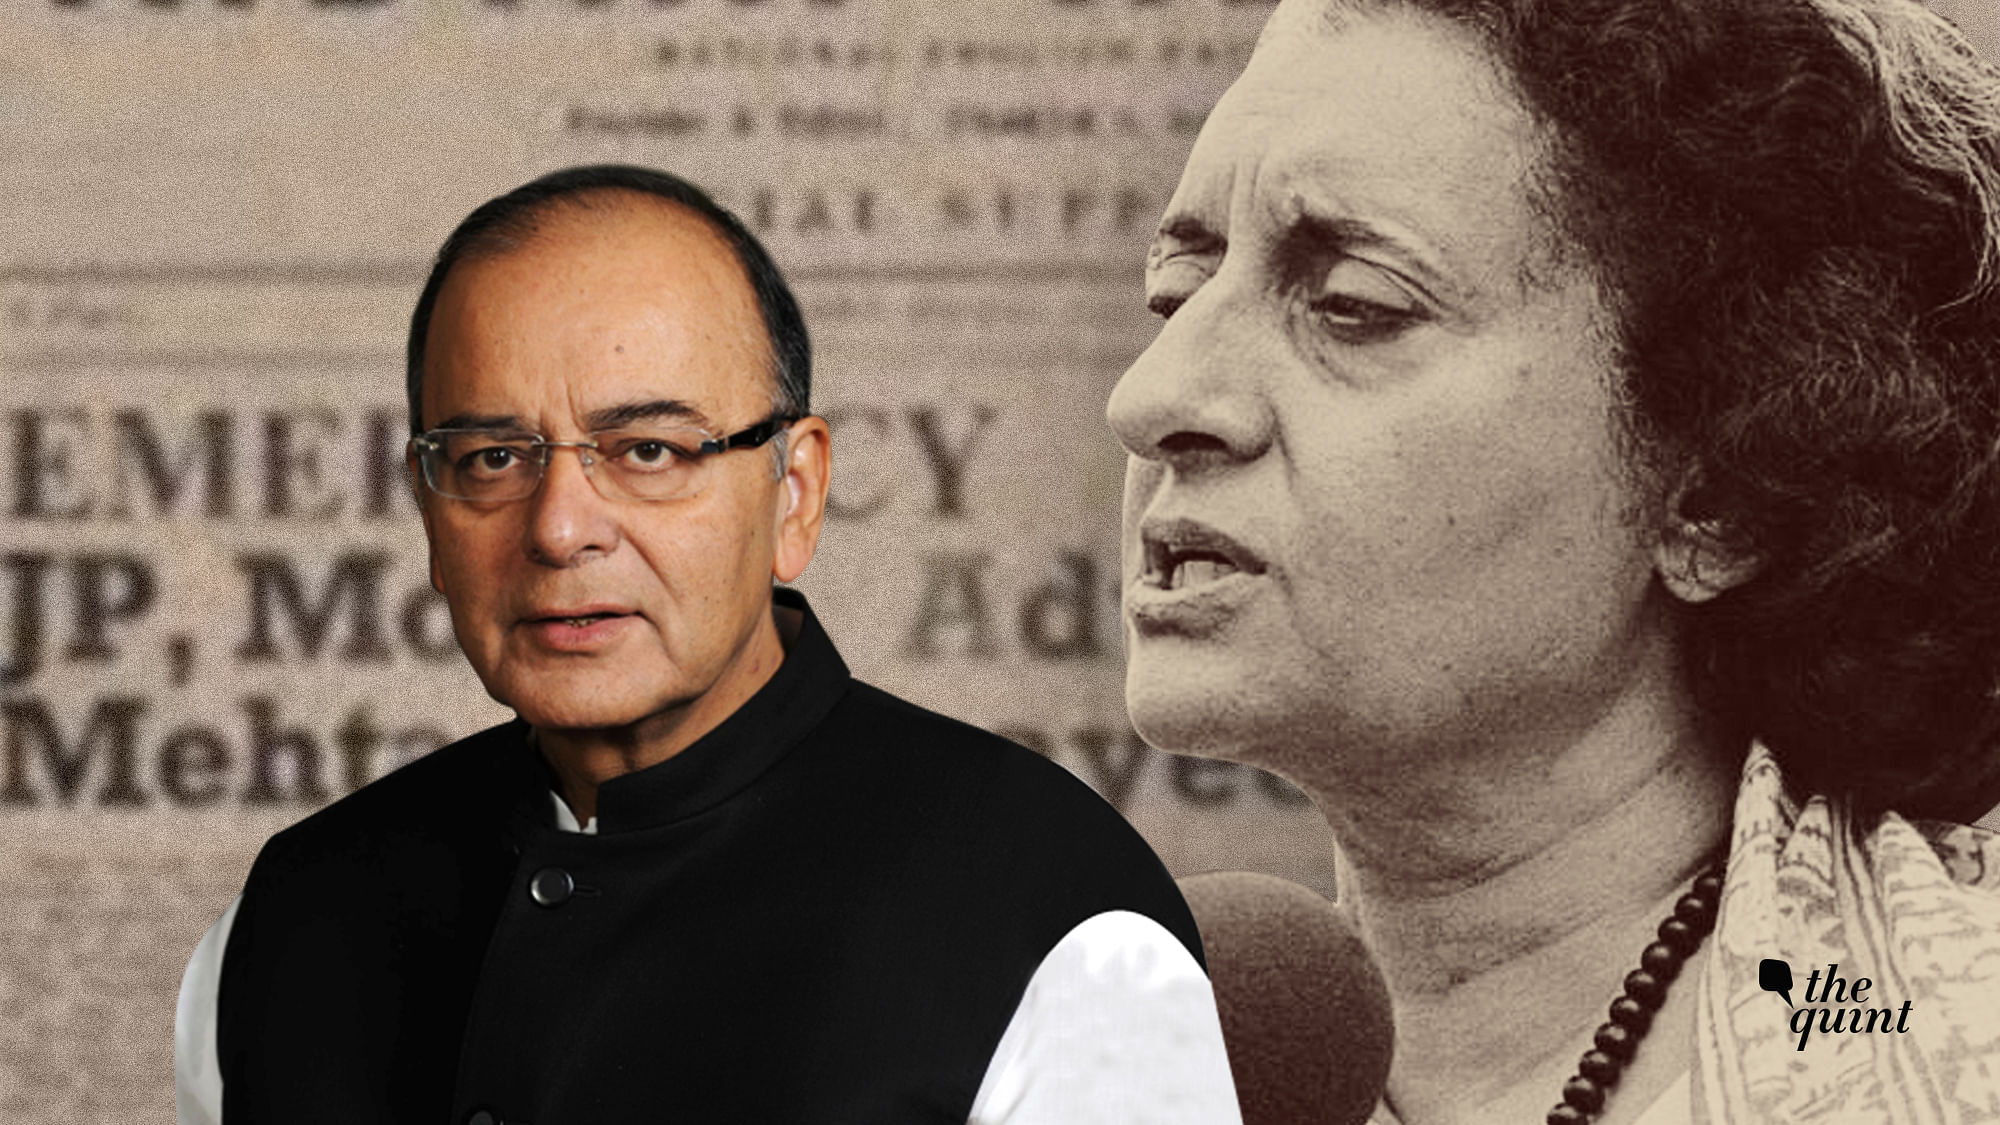 In the first of his three part series, Arun Jaitley chronicled the events leading up to the 1975 Emergency.